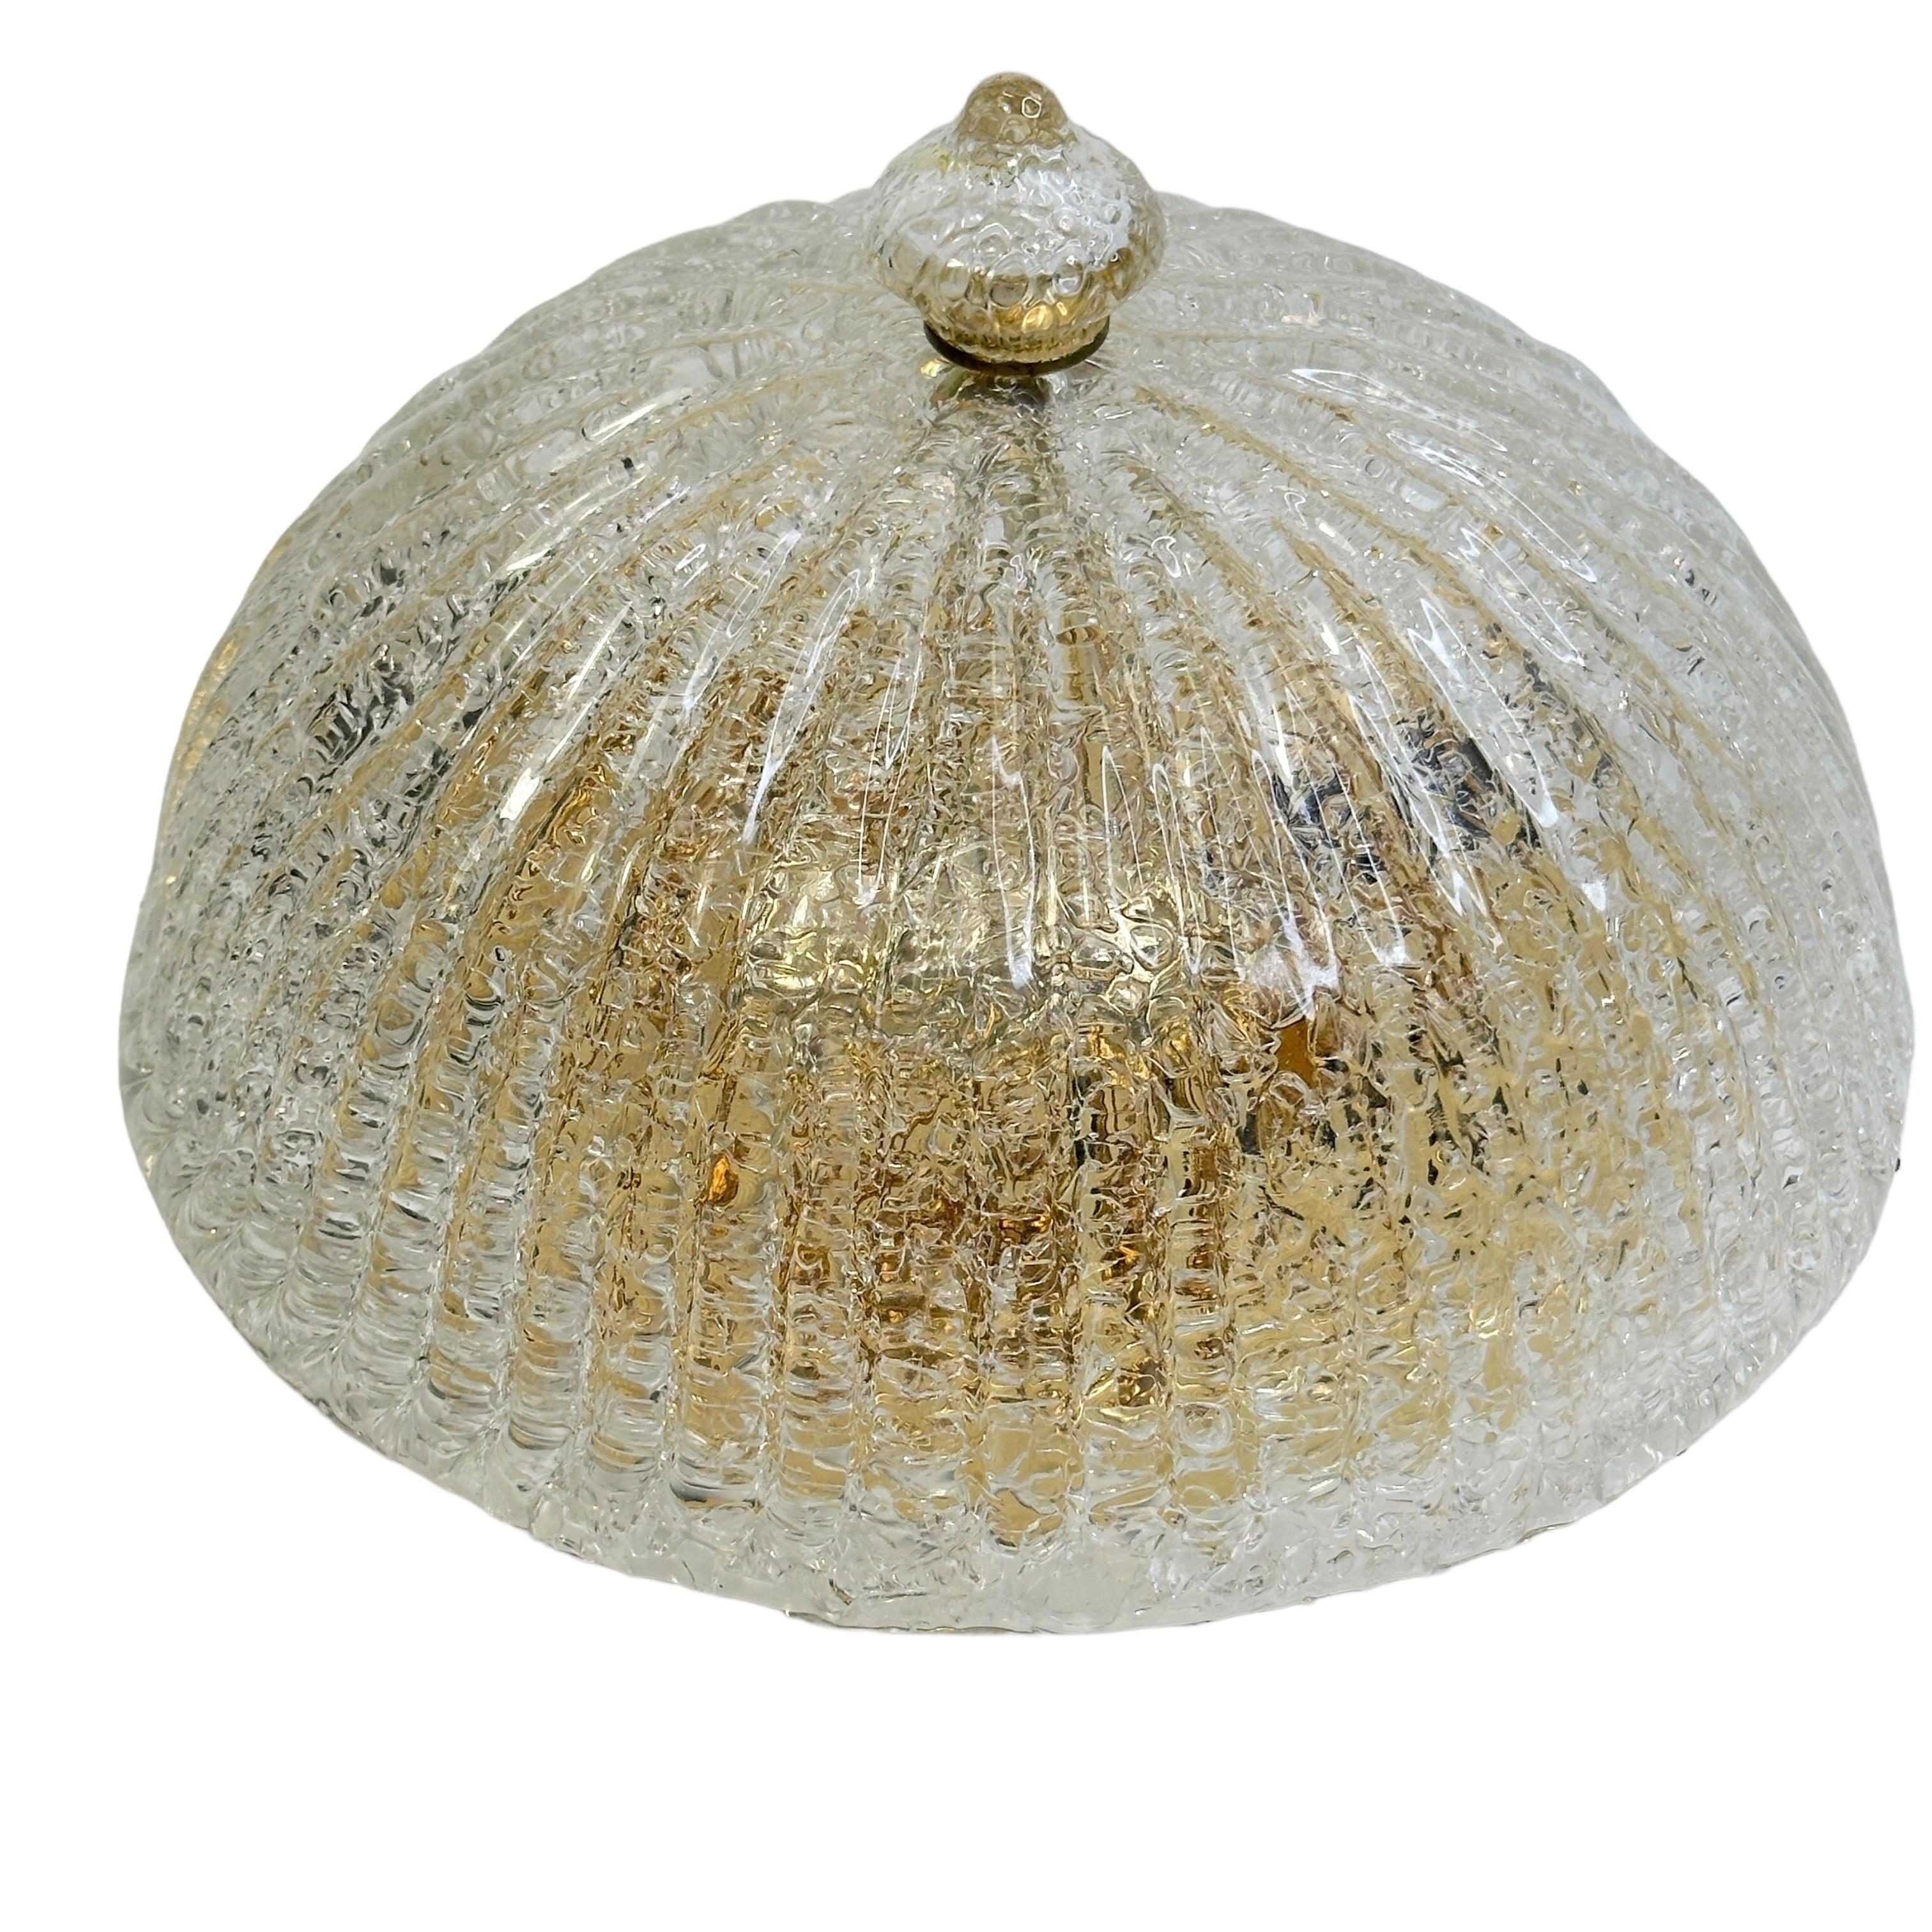 This exquisite flushmount chandelier was made in Murano, Italy, circa 1980s. It features a subtly concave and channeled hand blown Murano glass shade with metal fittings. A beautiful hand made glass onion dome on top as a part of the screw that